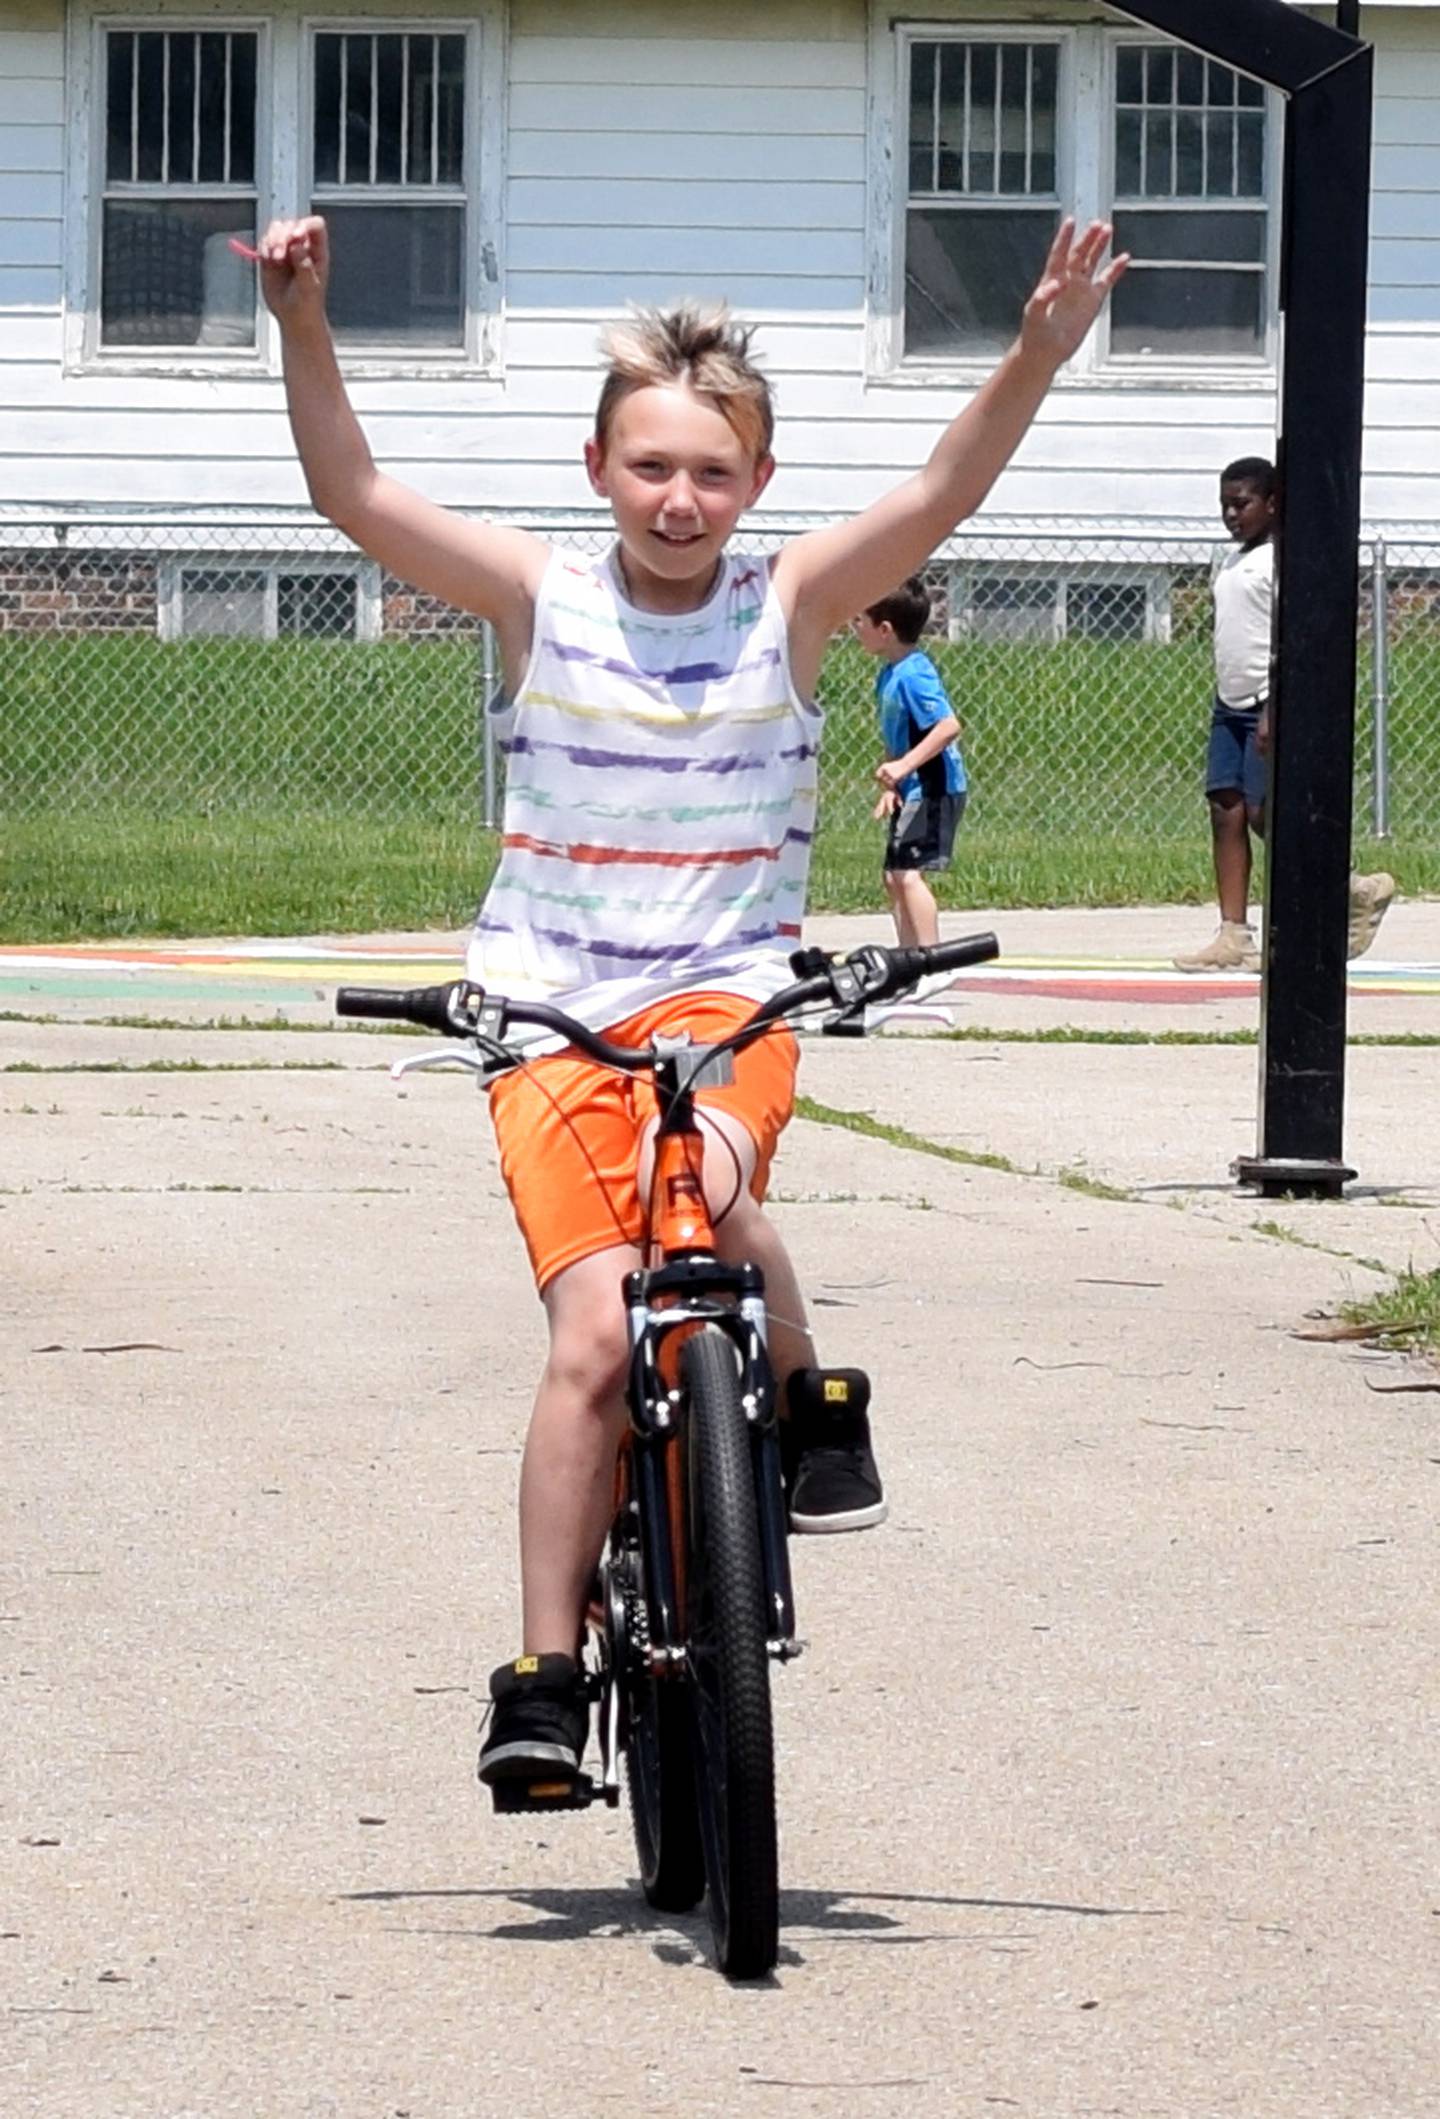 Erick Johnson-Carruthers, a third grade student at Emerson Hough Elementary School, shows off while riding his new bike he won from the Book for a Bike program, which is sponsored by the Newton Masonic Lodge.